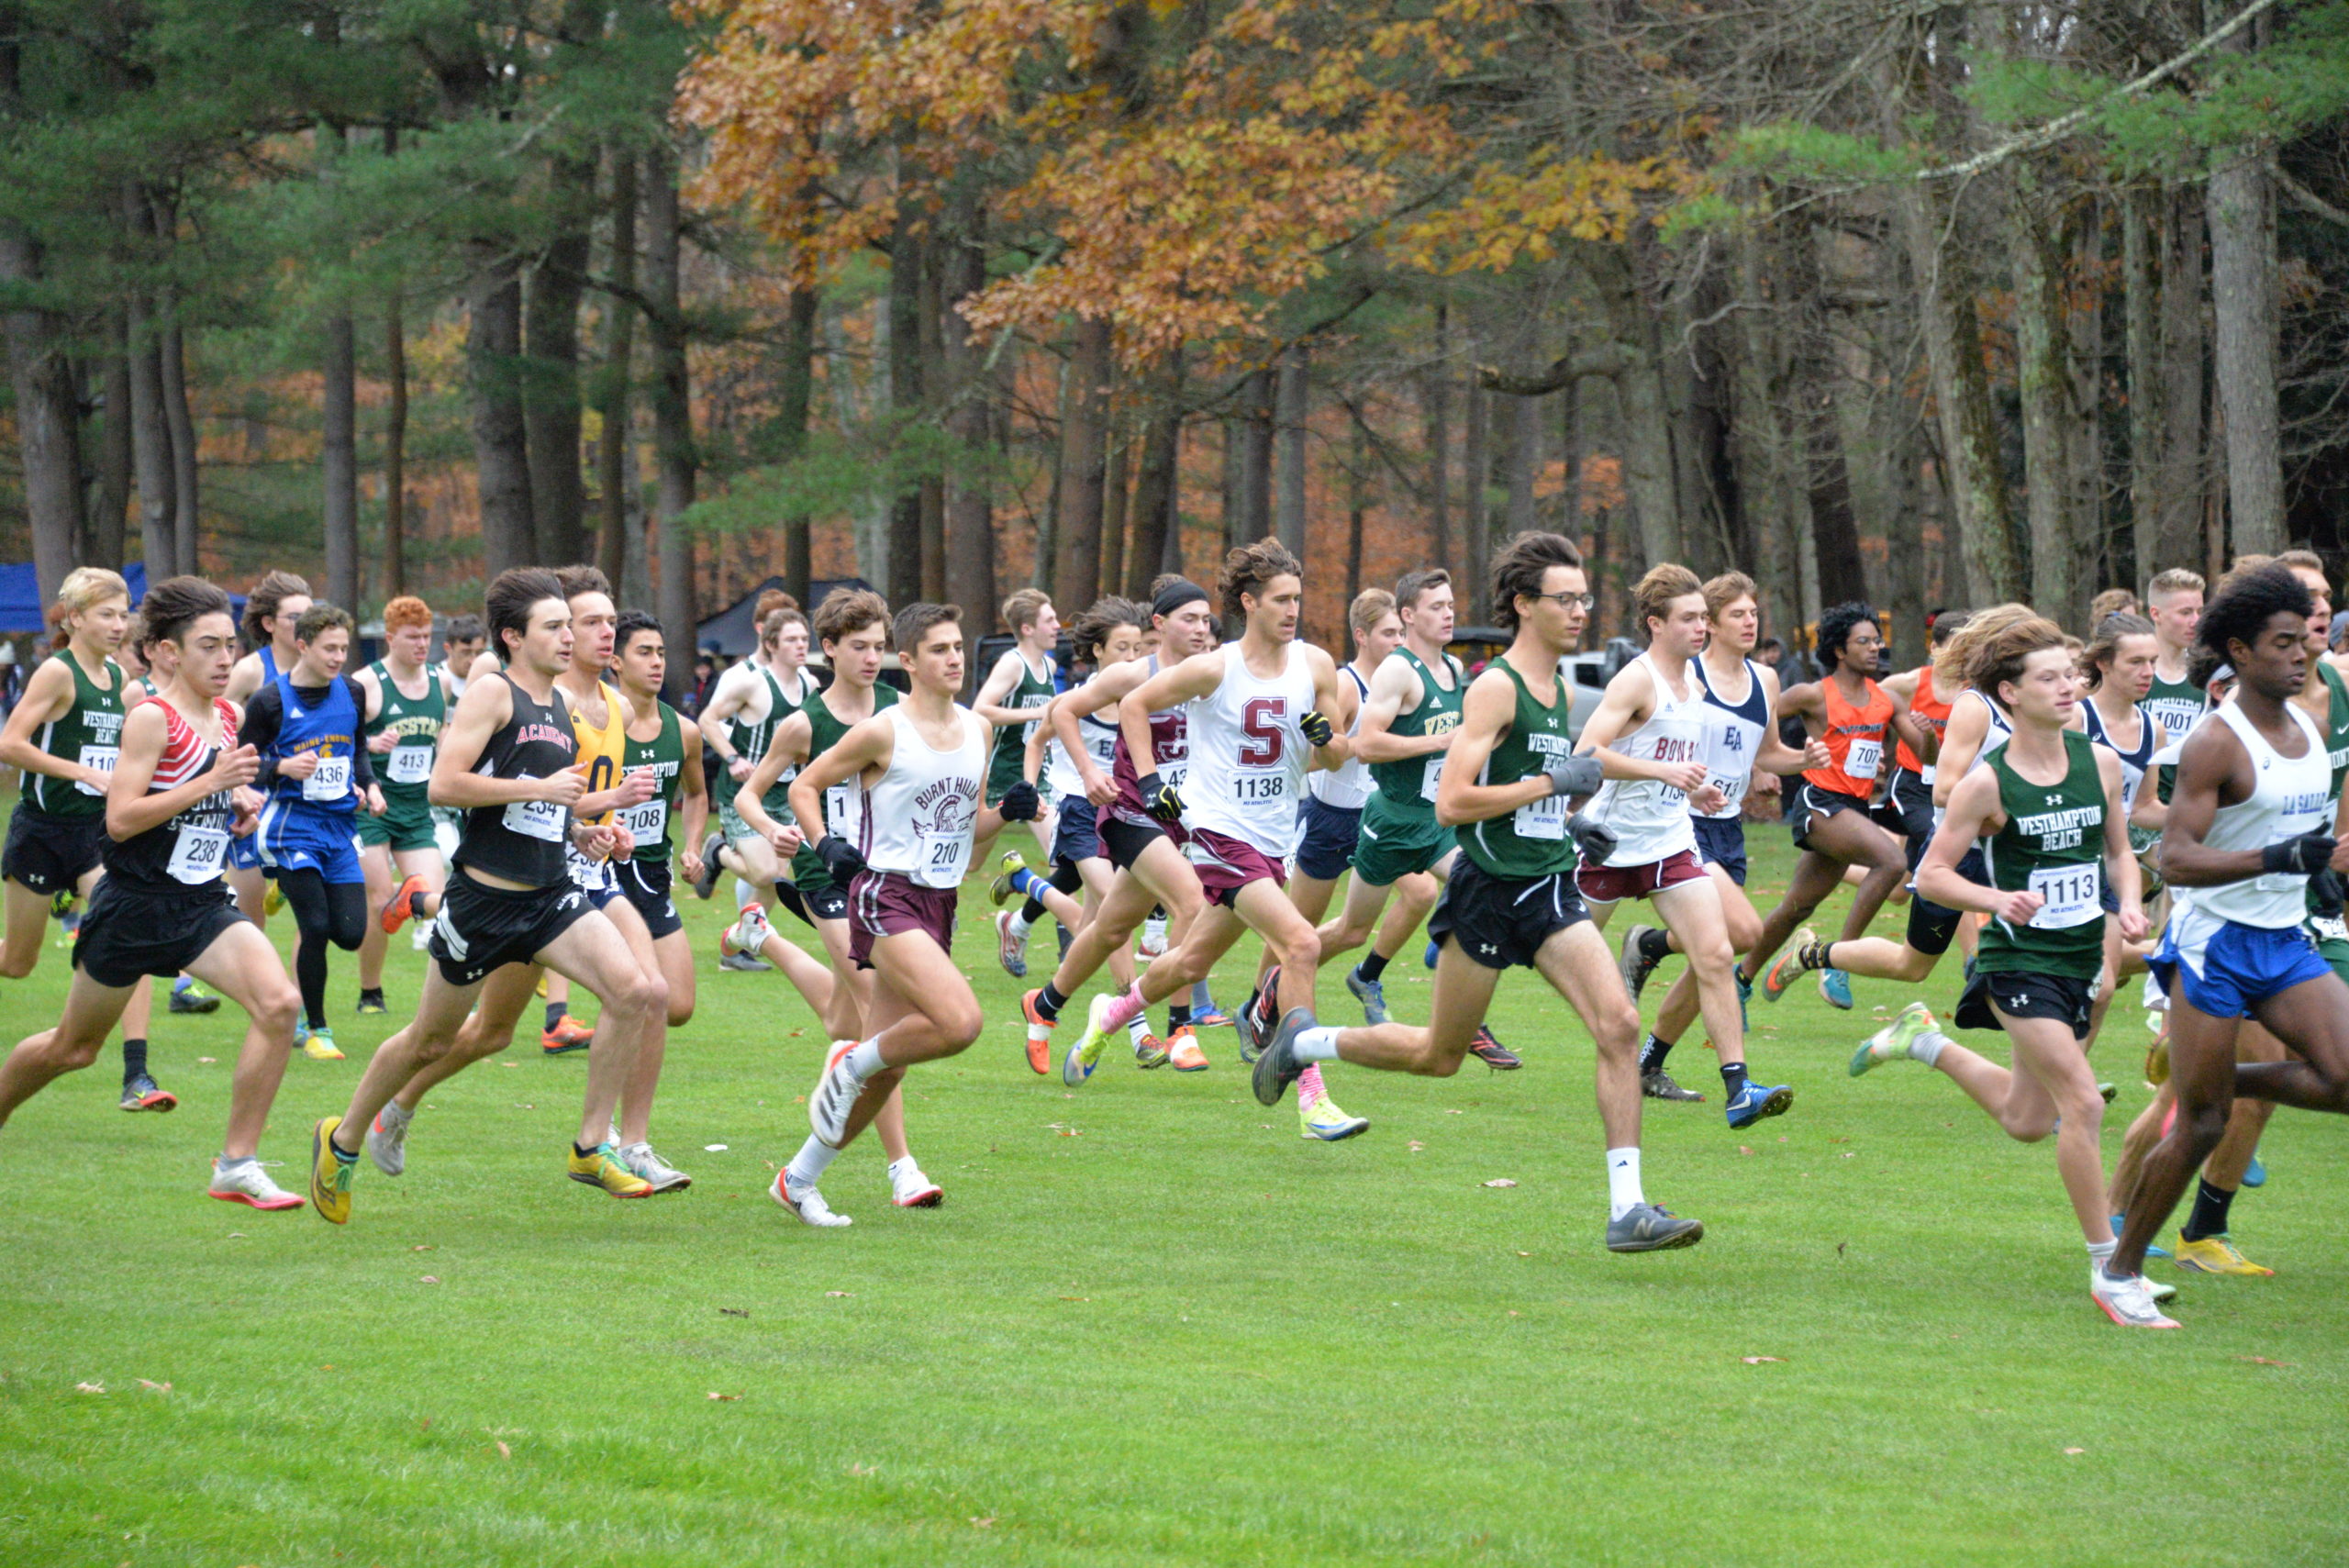 Southampton senior Billy Malone at the start of the New York State Class B Championship race on Saturday.